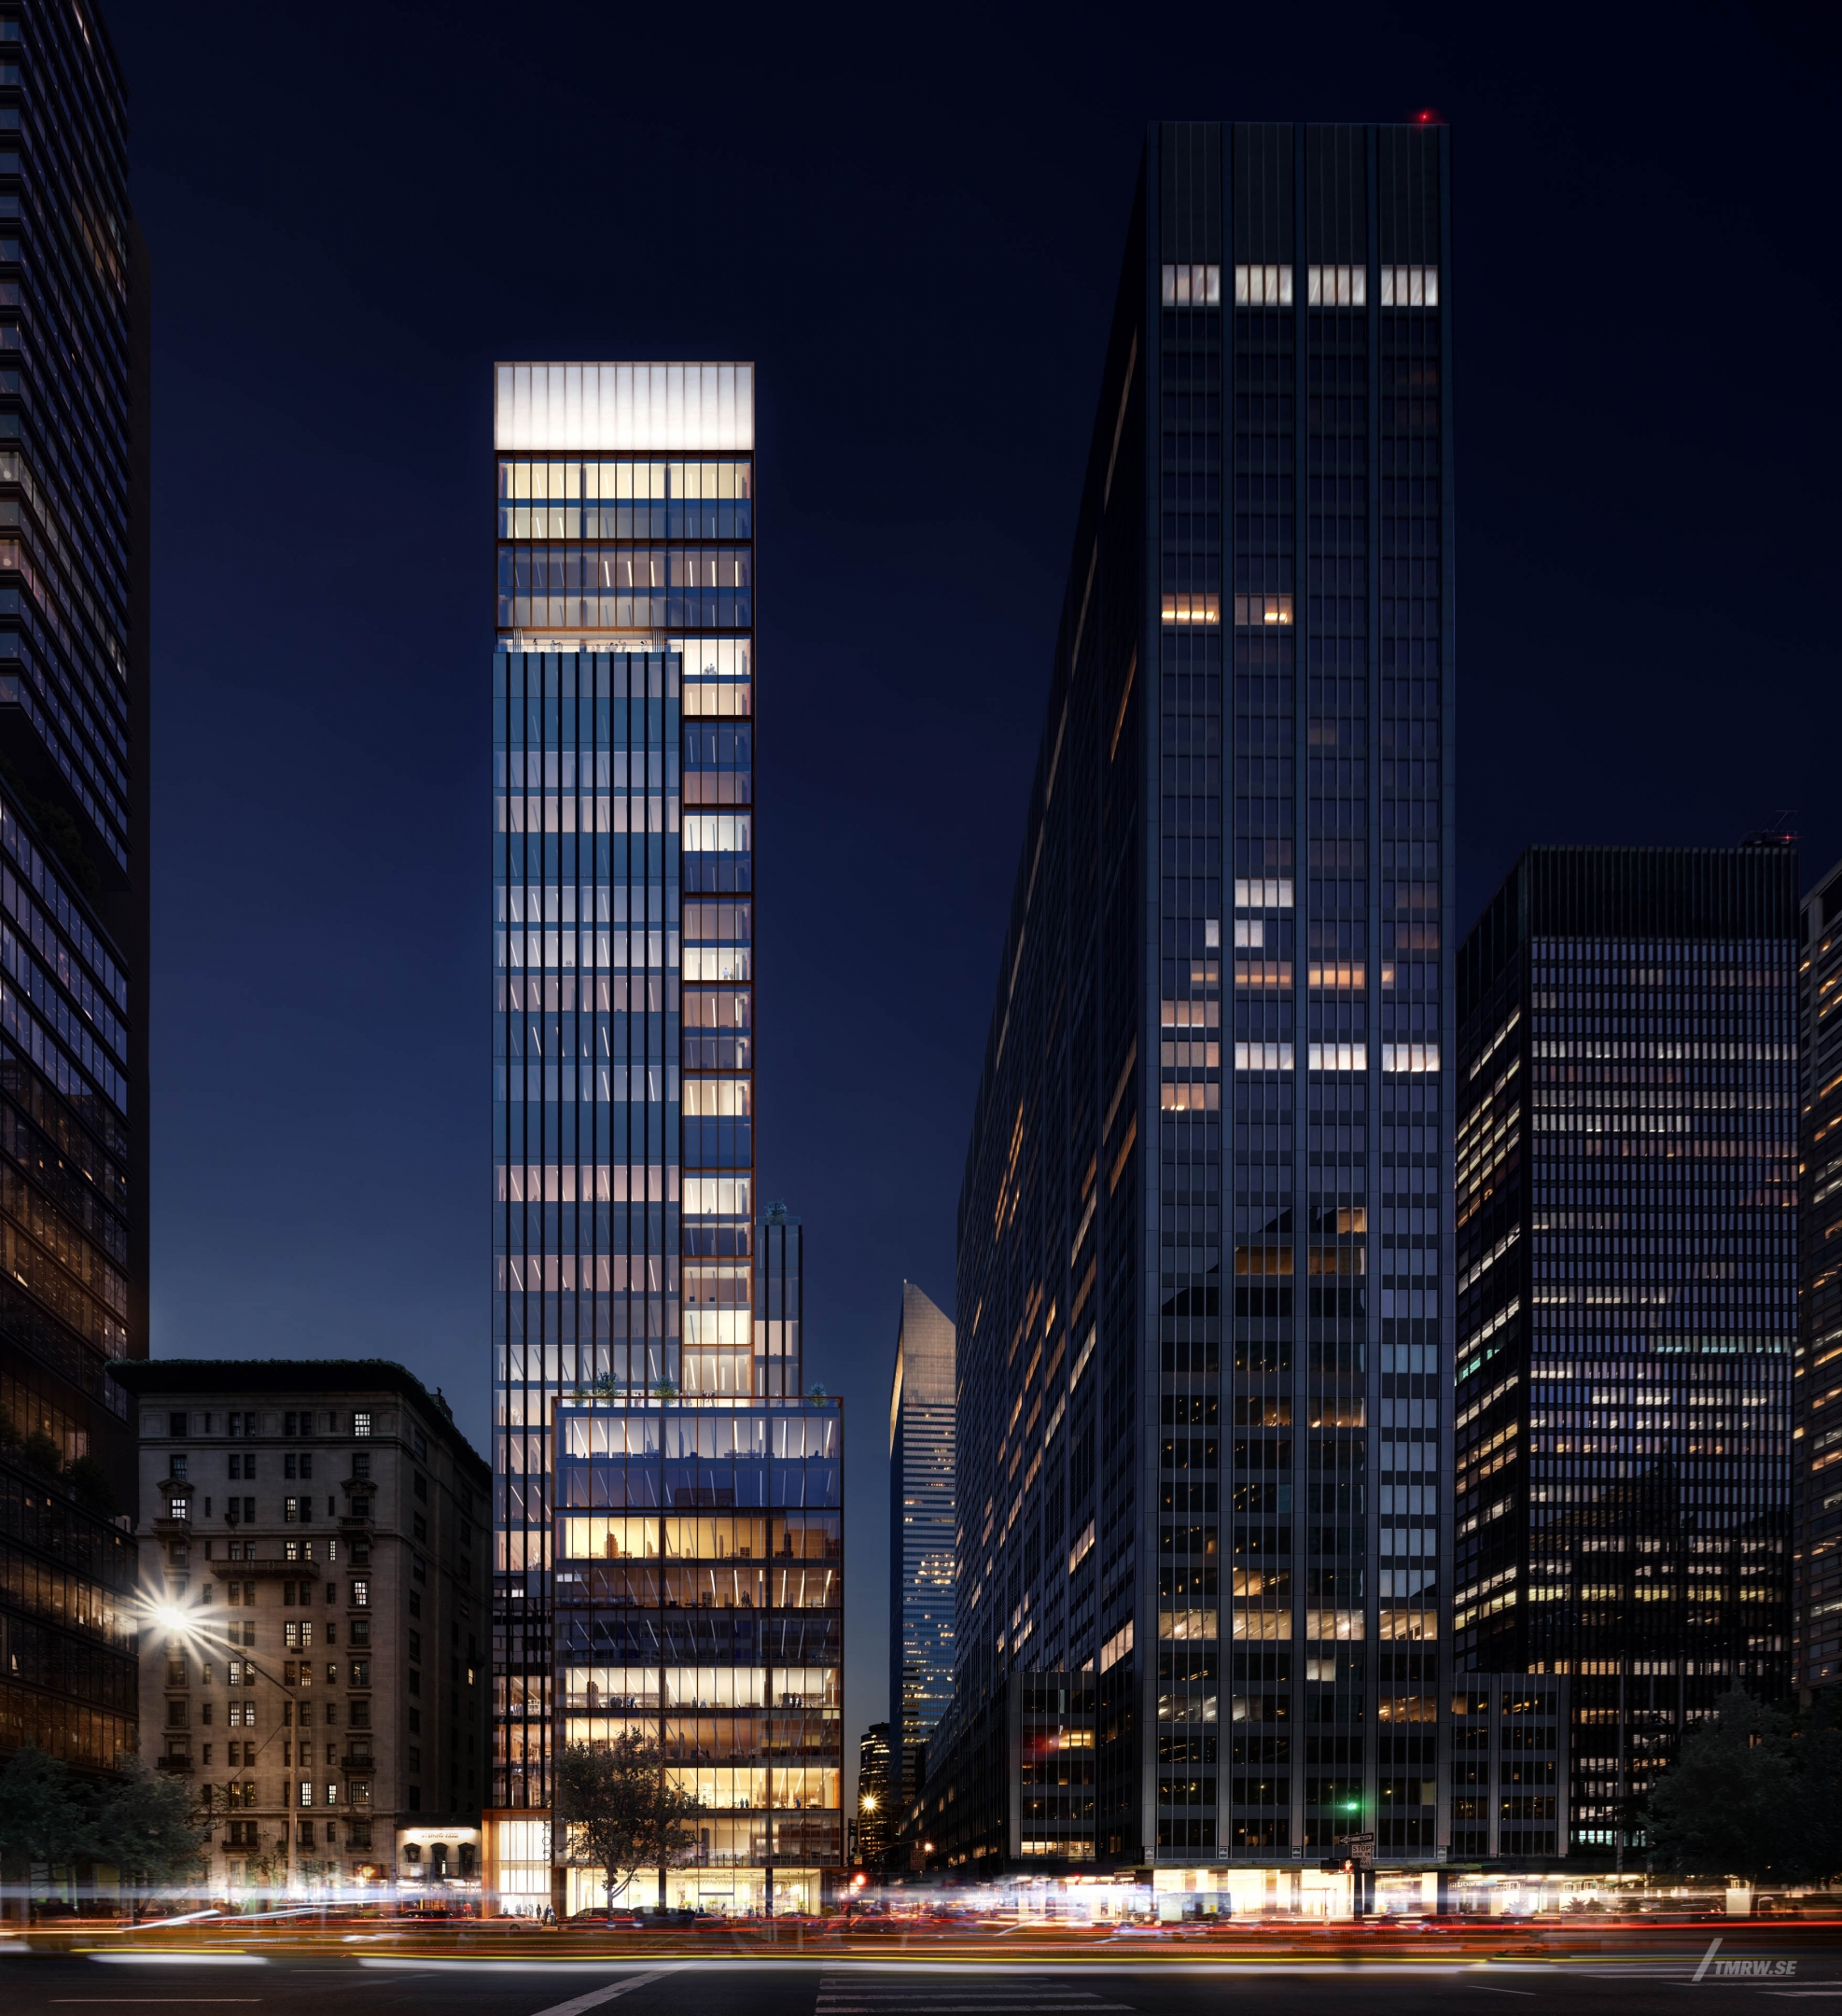 Architectural visualization of 405 Park Avenue for Gensler, an office tower at night from a street view.